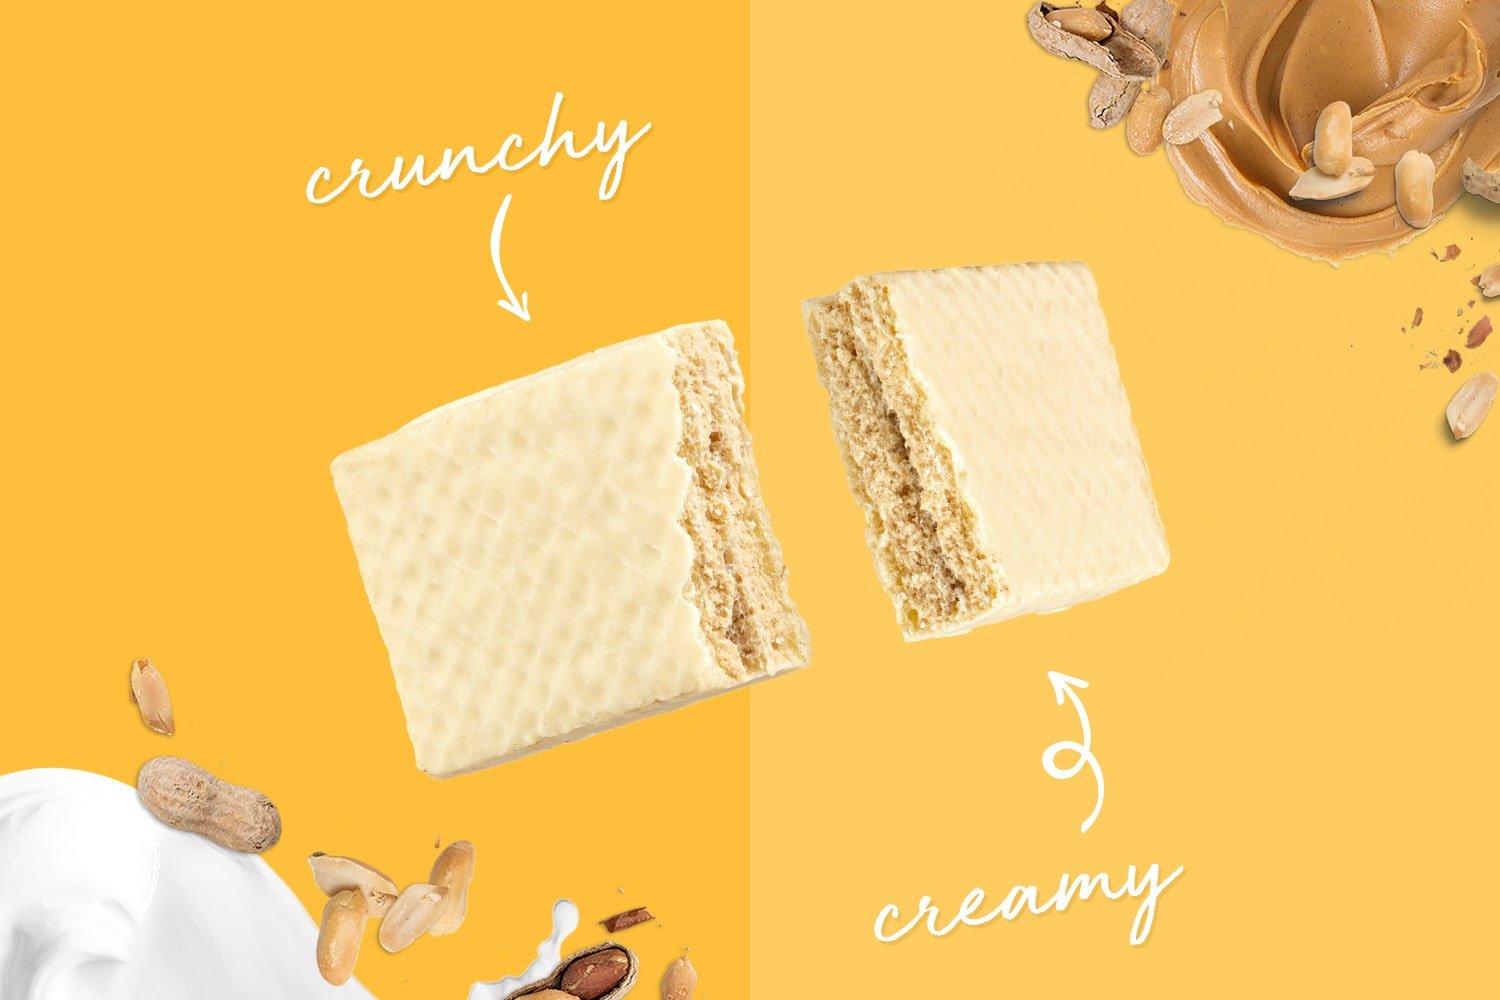 Creamy and crunchy wafer protein bars in PRO Peanut Butter